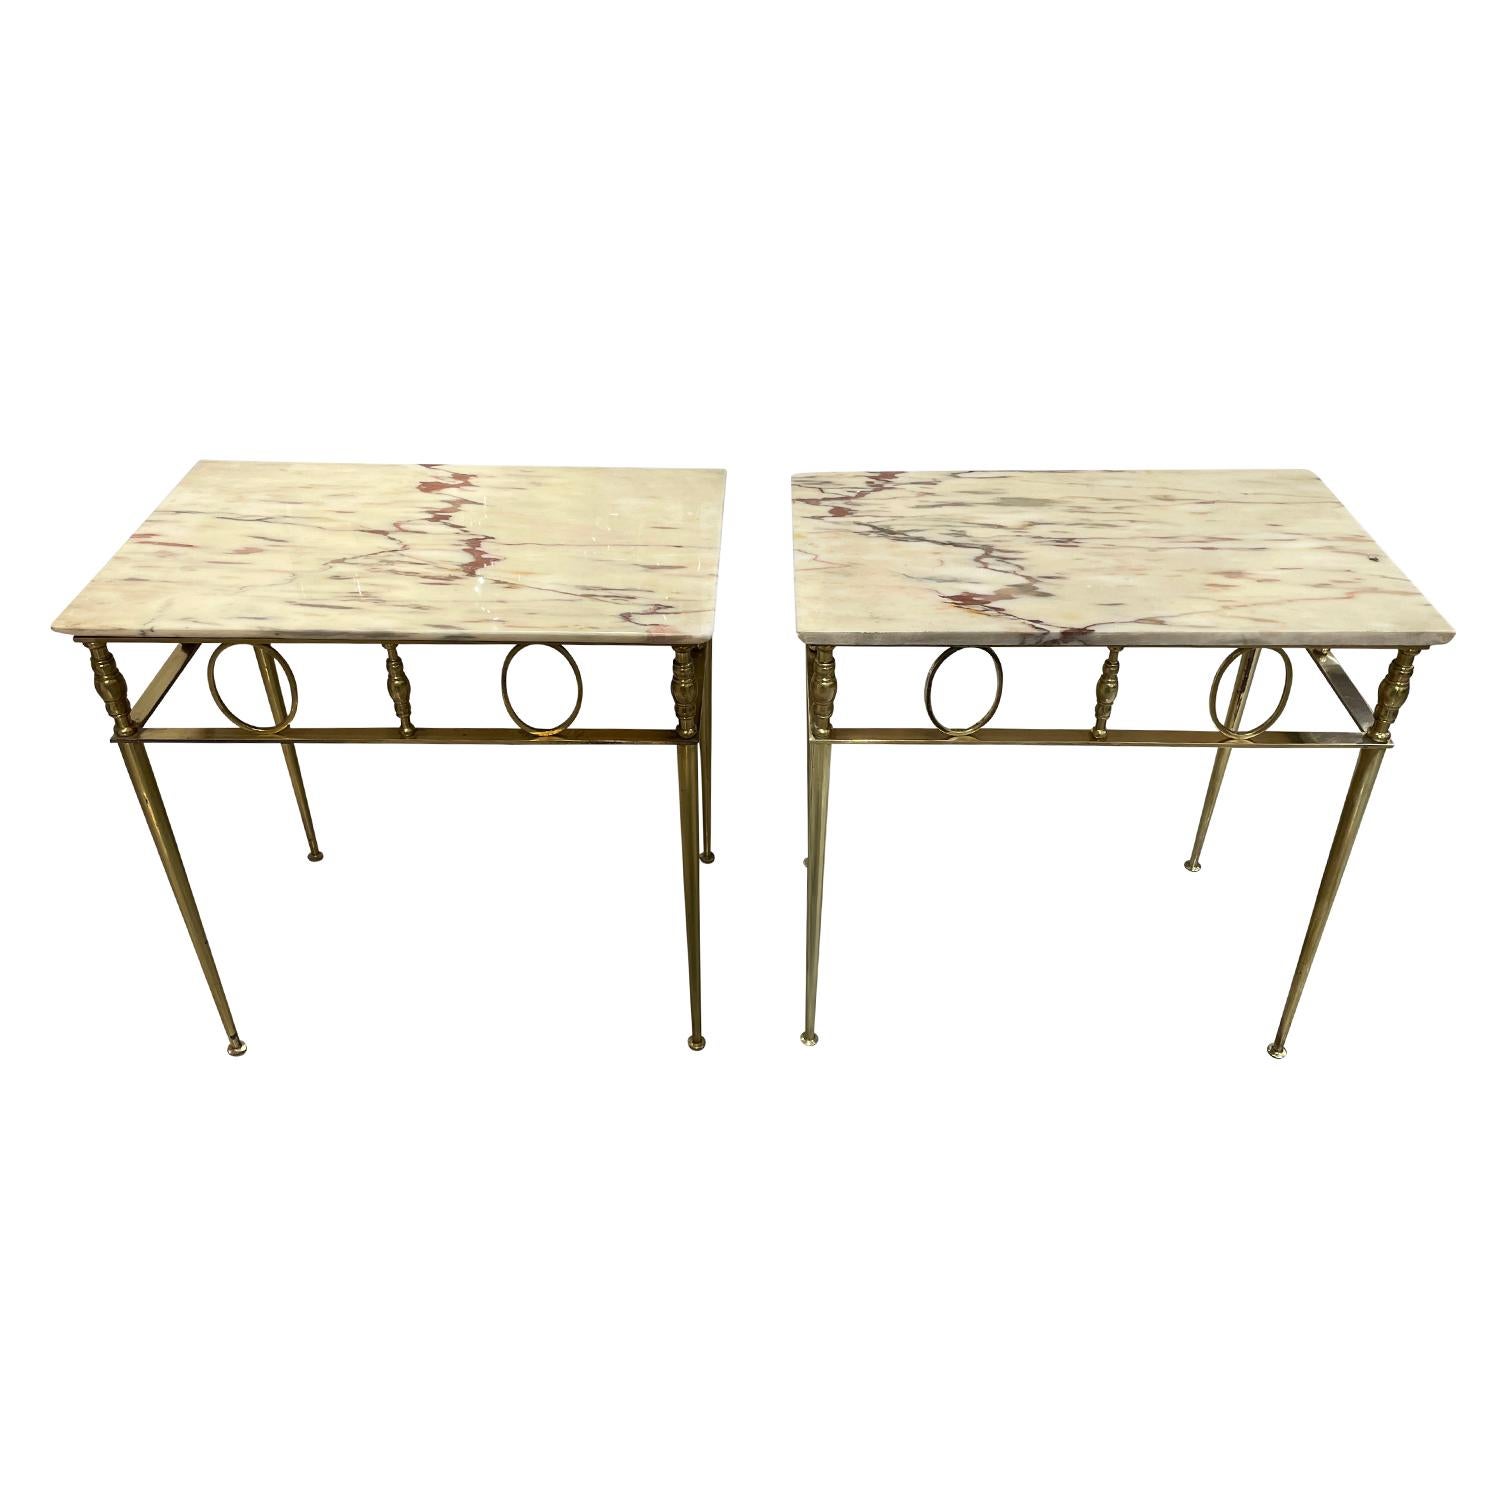 20th Century French Art Deco Pair of Vintage Marble, Brass Side Tables In Good Condition For Sale In West Palm Beach, FL